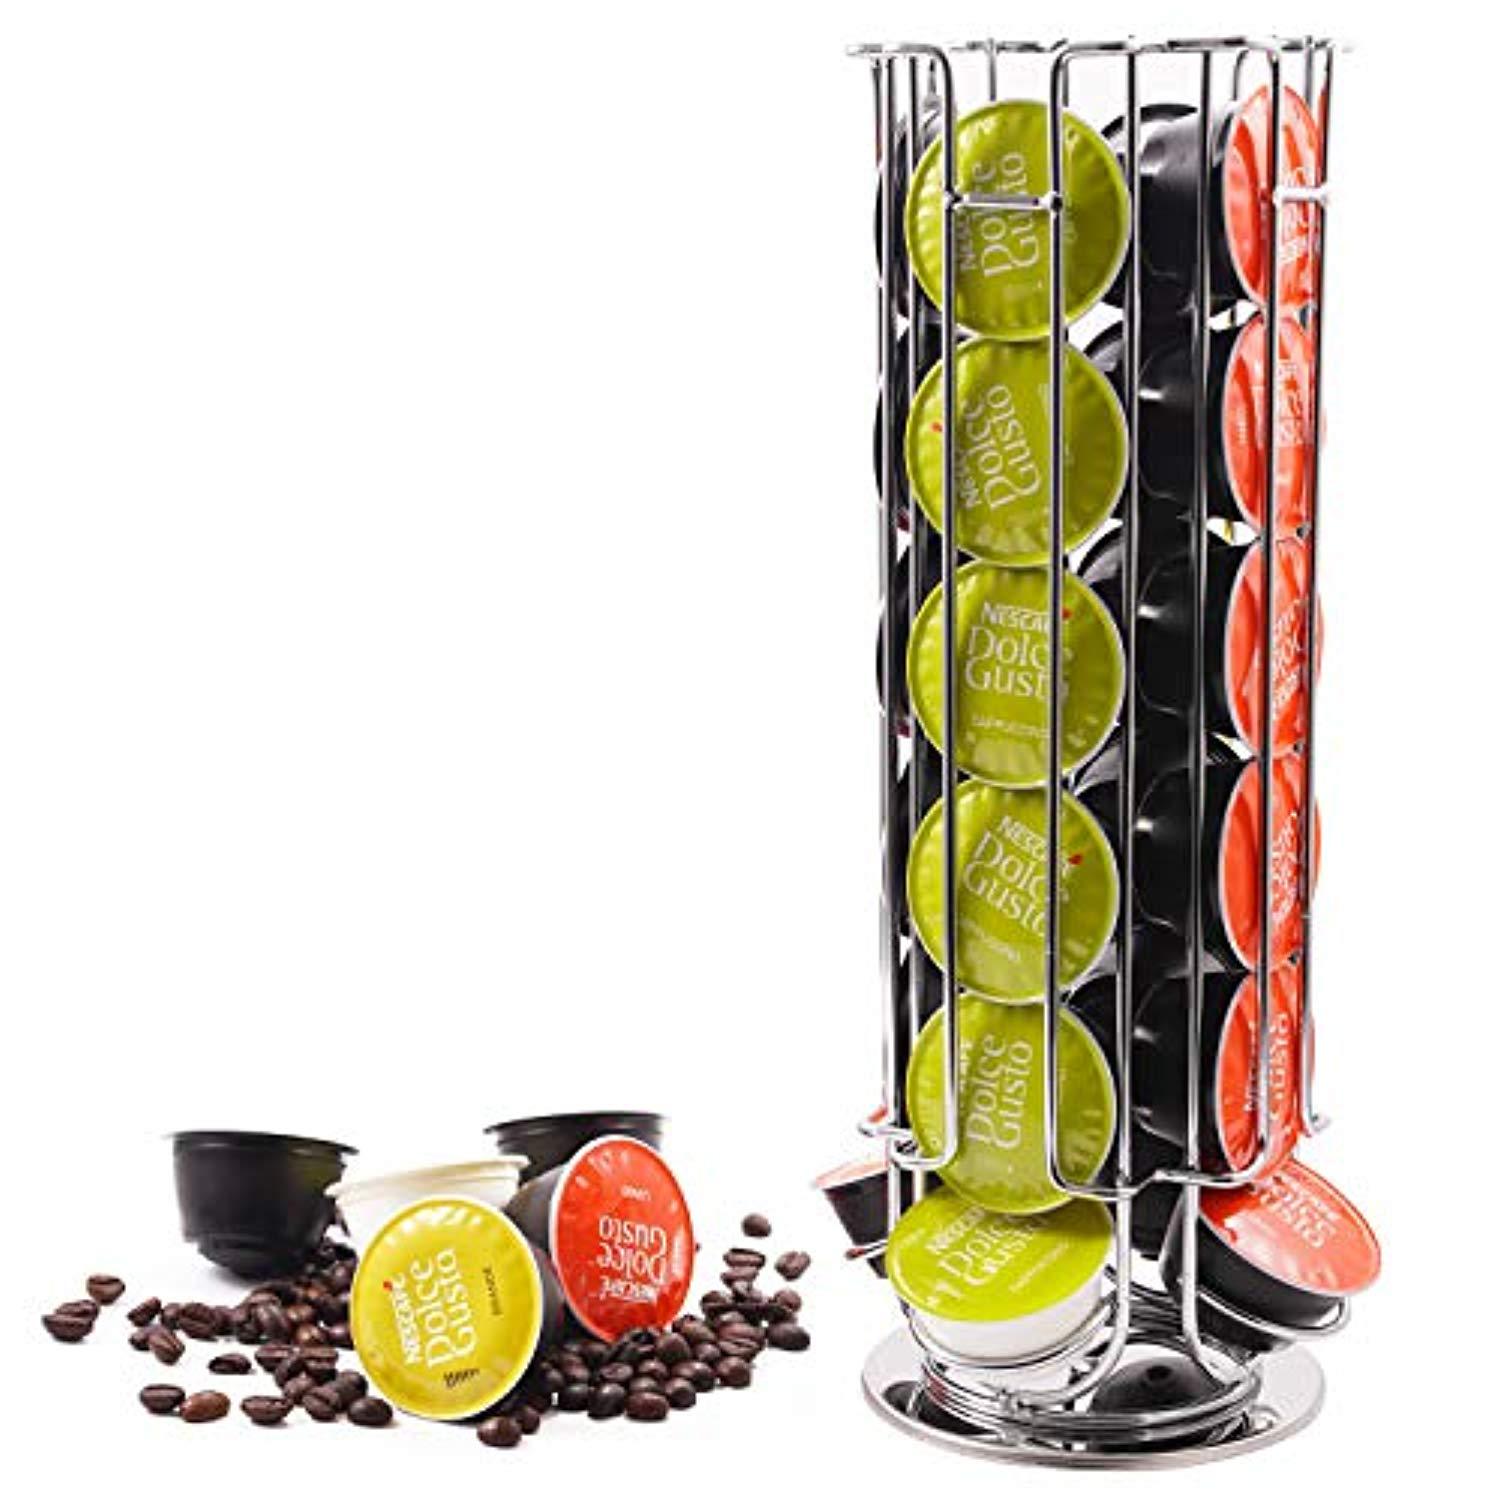 Coffee Pod Holder Organizer Rack Stand Tower For Dolce Gusto